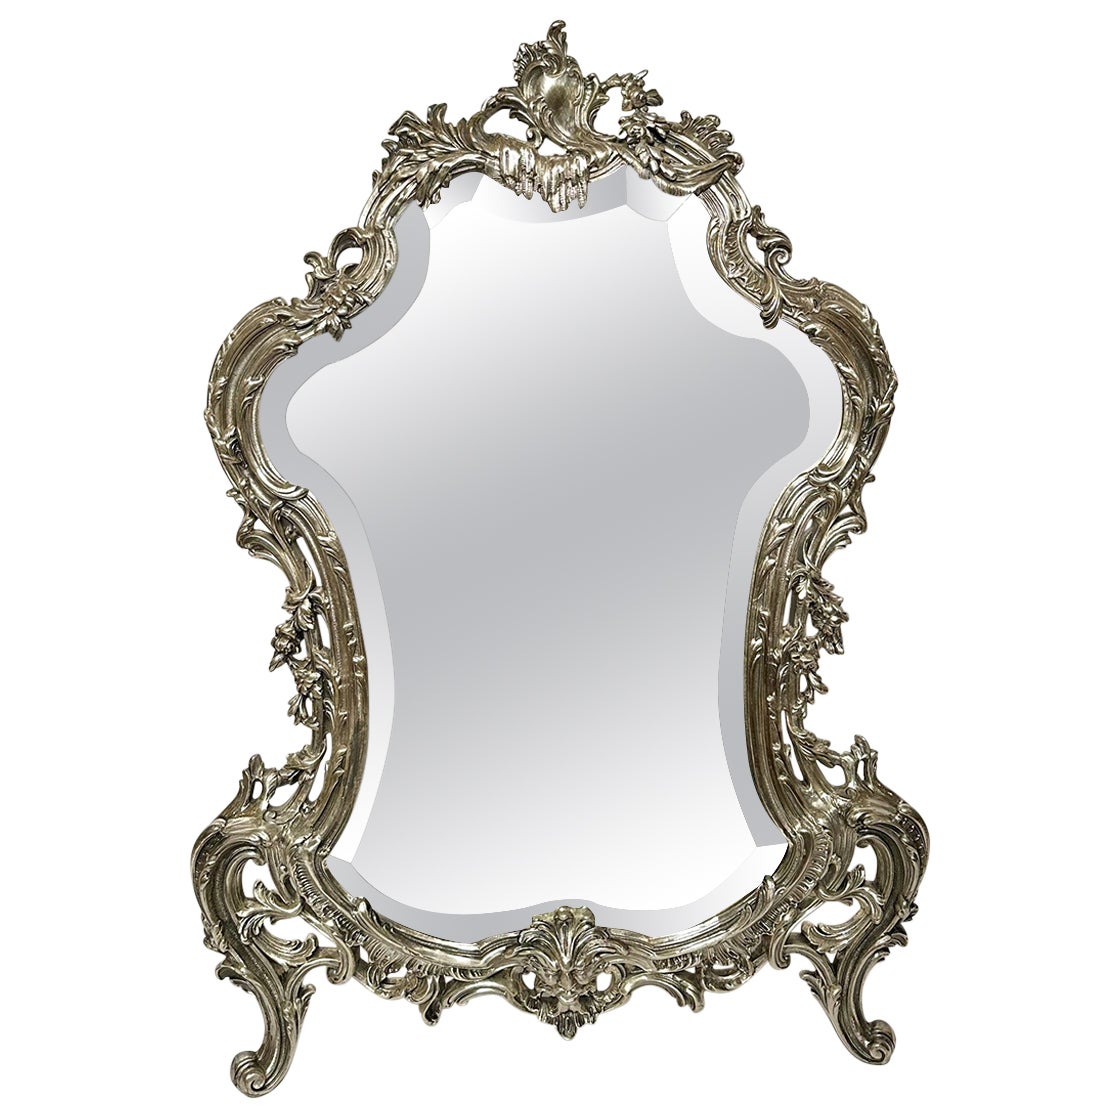 Antique French Silvered Bronze Dresser Mirror with Beveling, Circa 1870-1880. For Sale